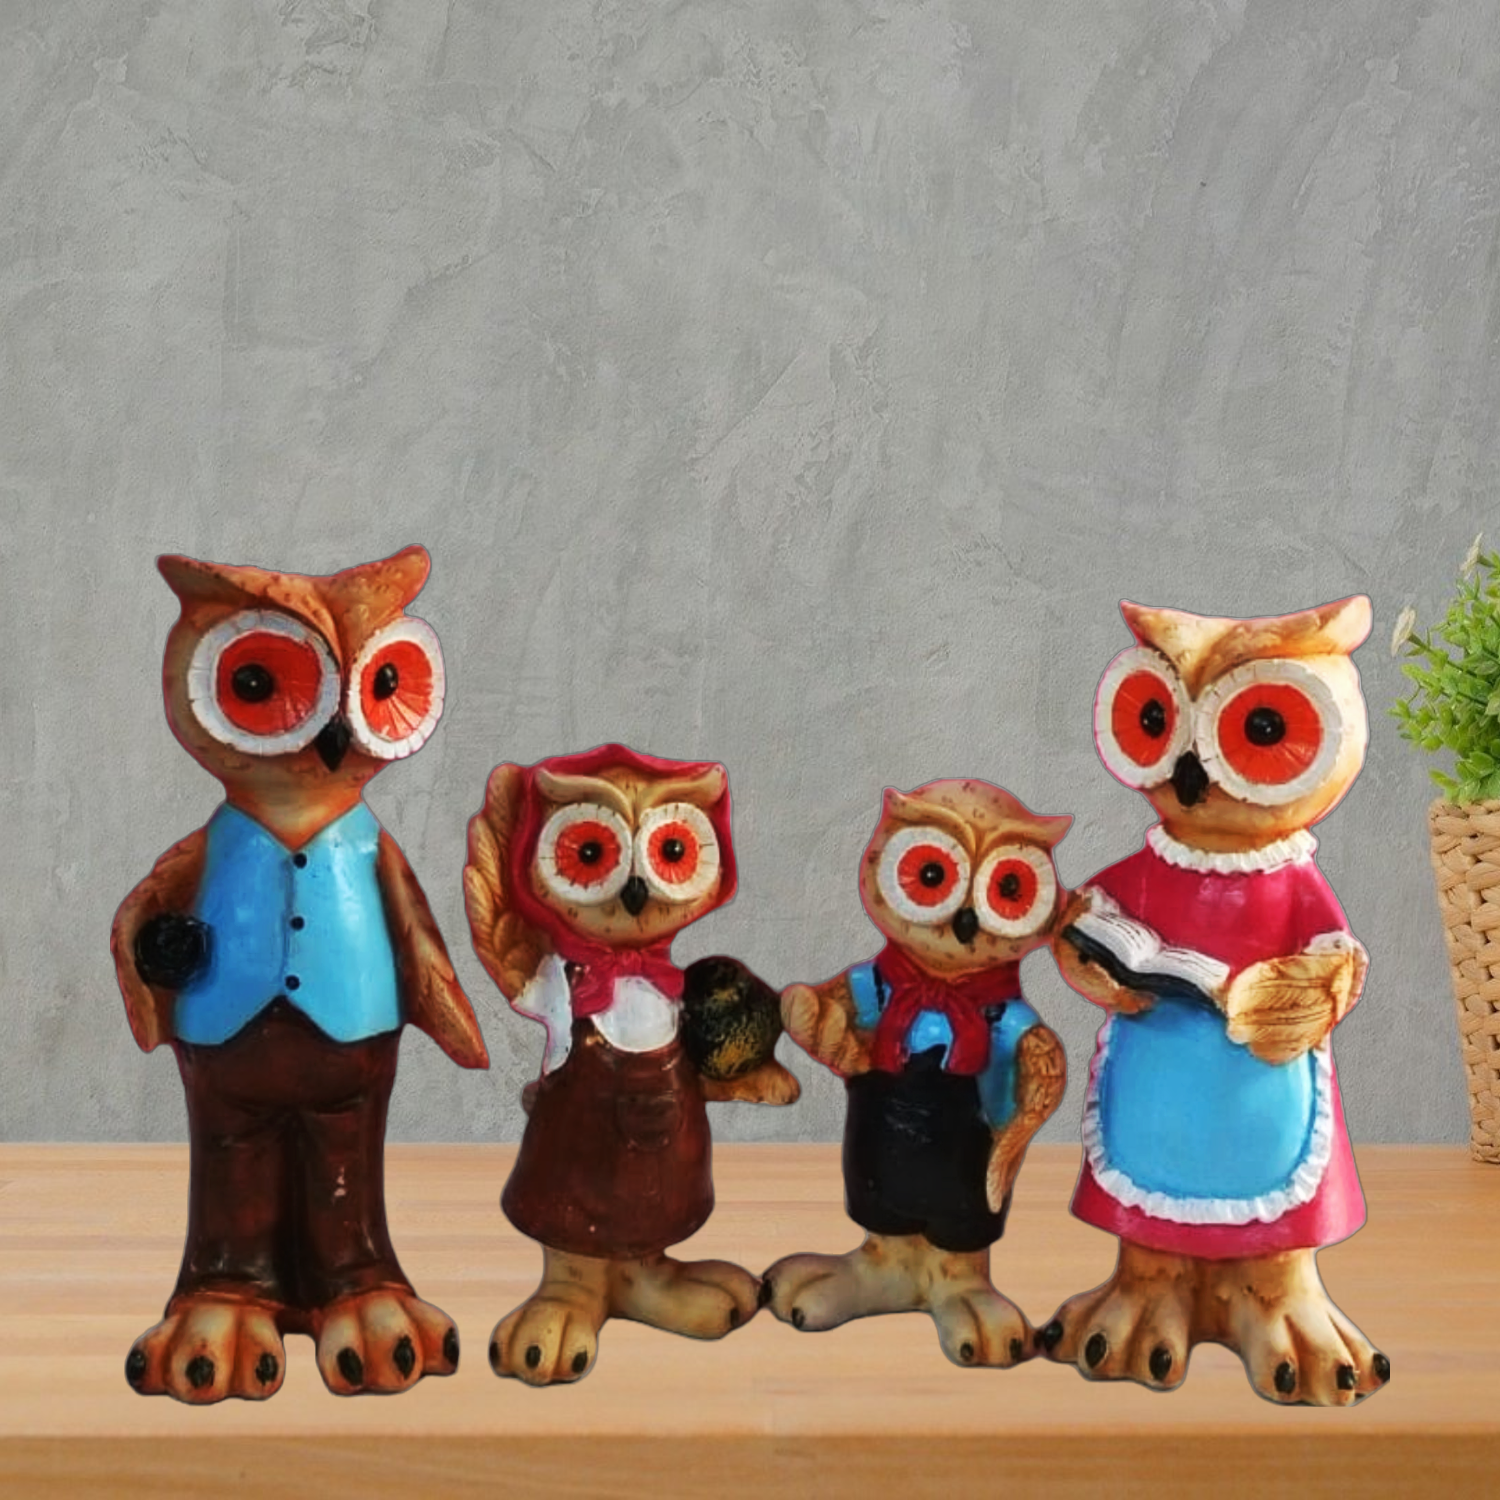 Statue ALiLA Owl's Family Showpiece for Home Decoration Interior Good Luck Statues, Set of 4 Statue